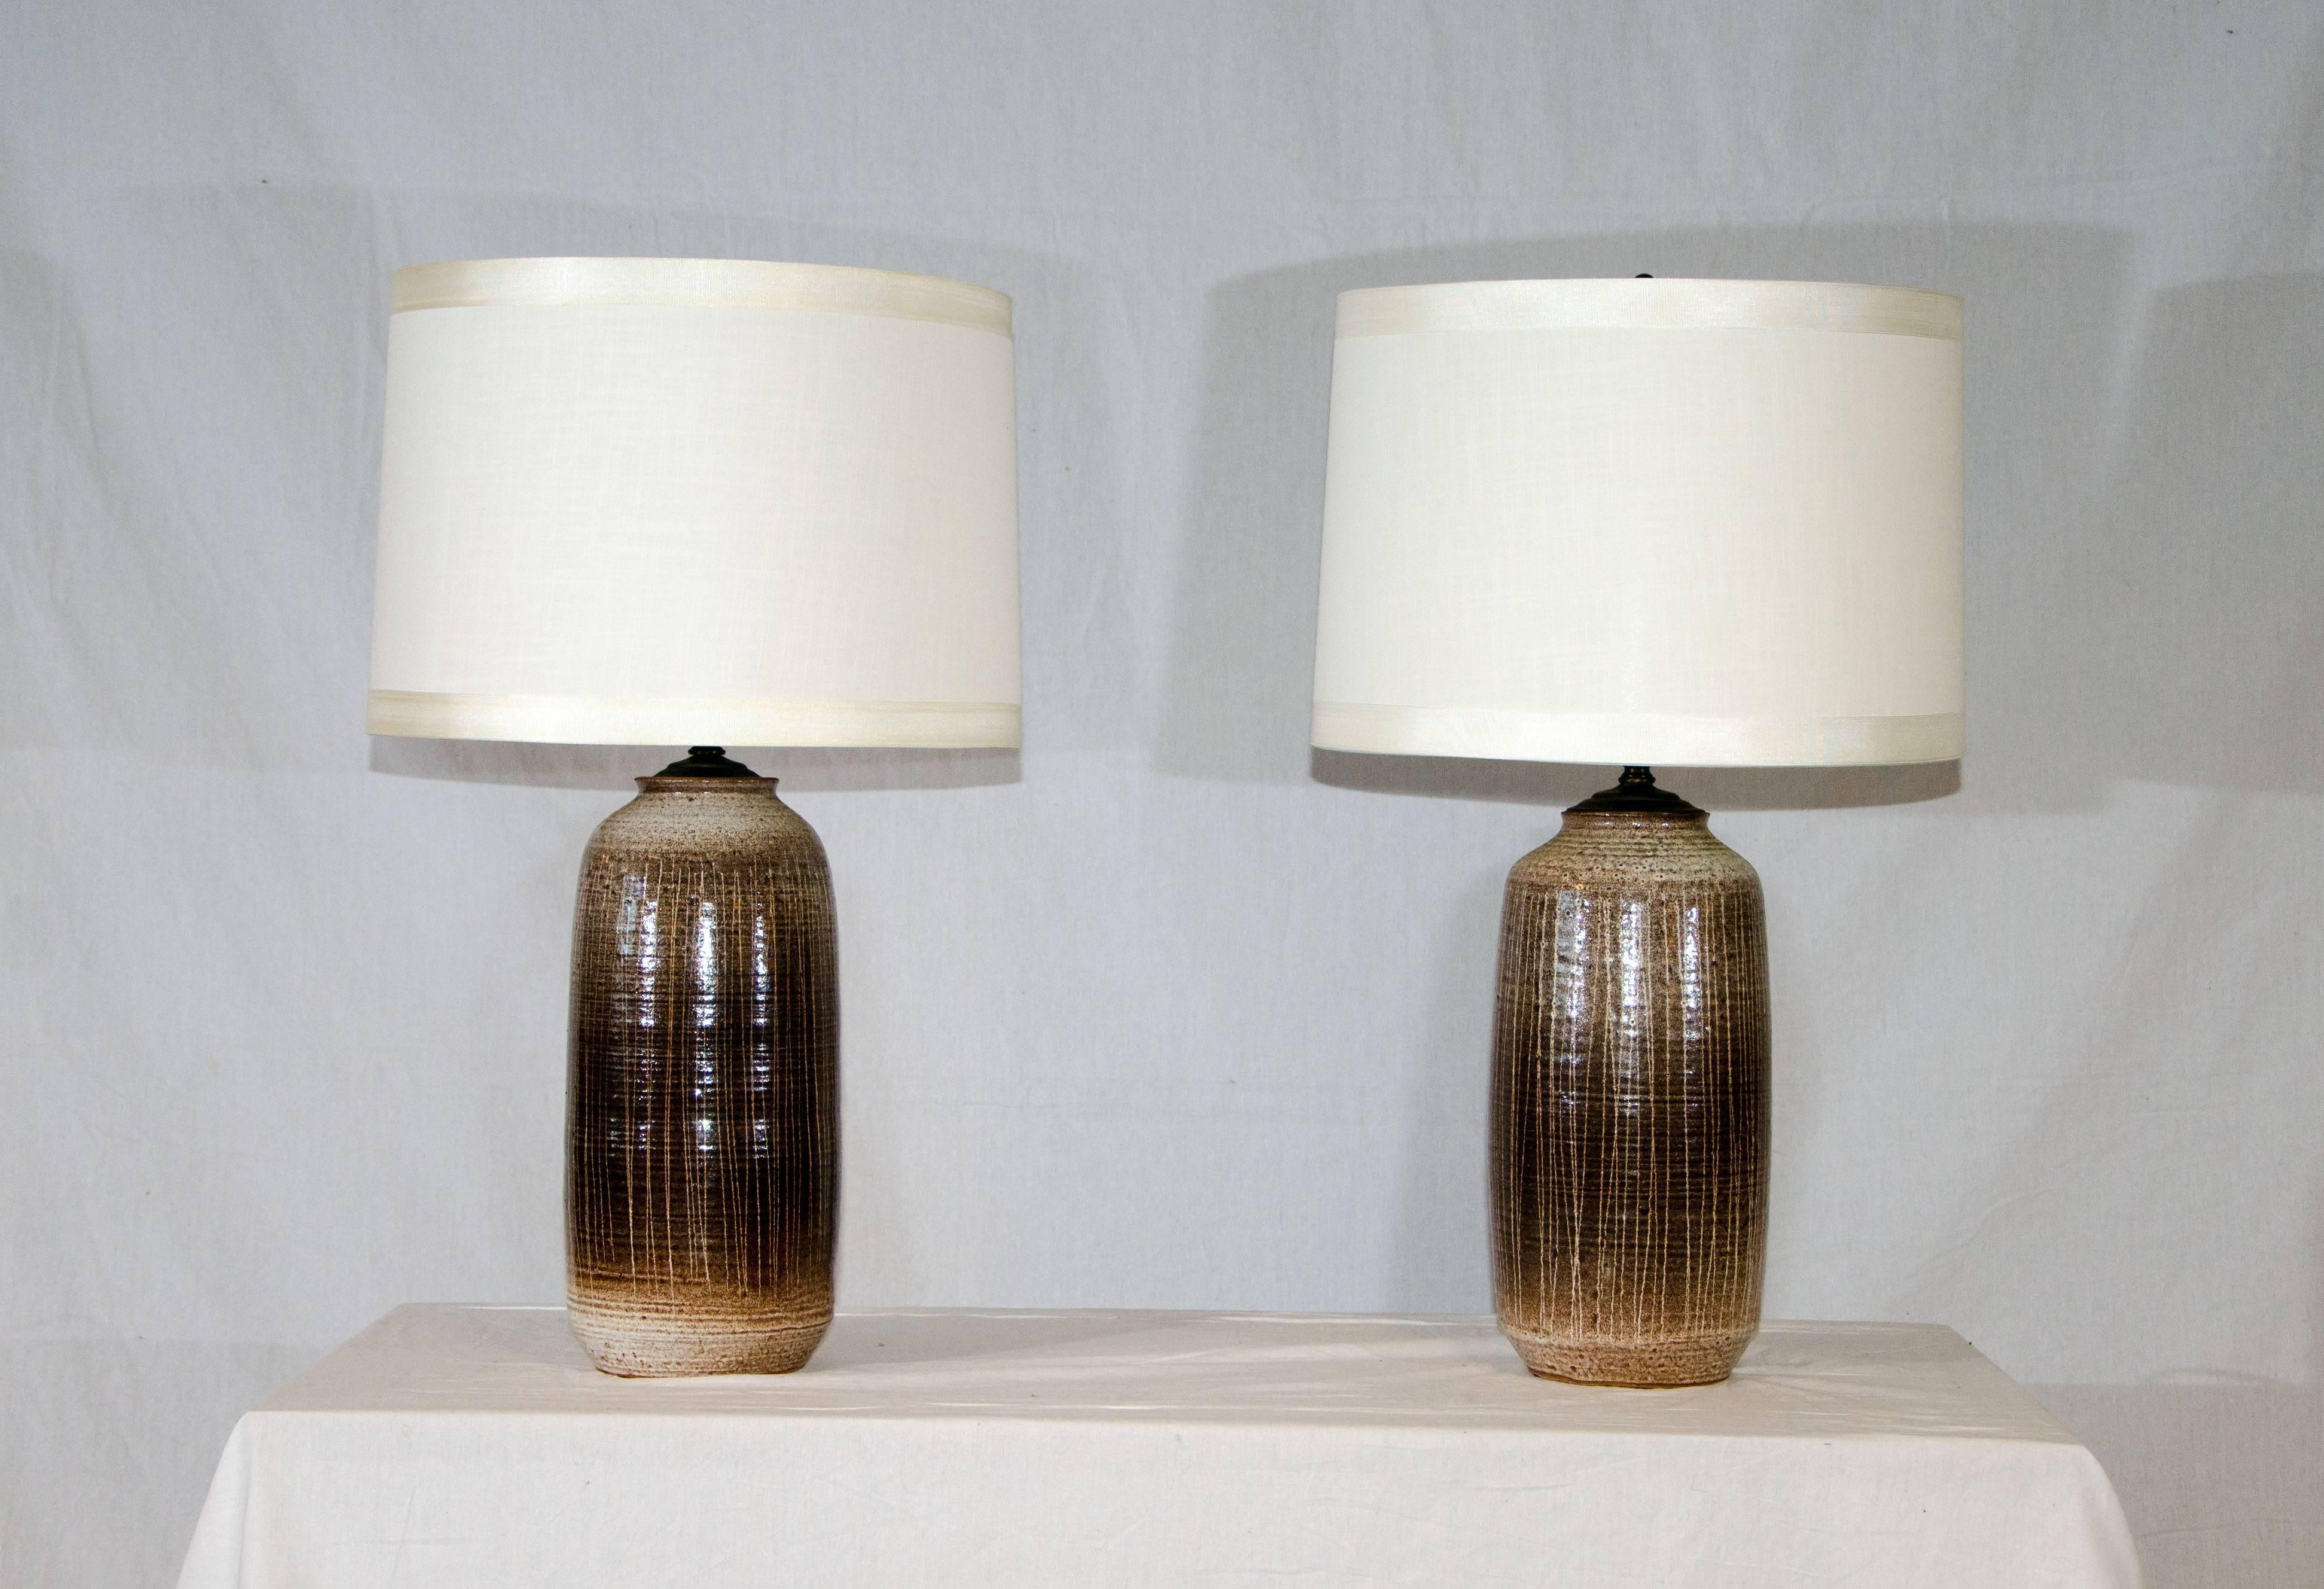 These lamps were handmade by Antonio Prieto and are slightly different, signed by the artist. Lamps bases are 14